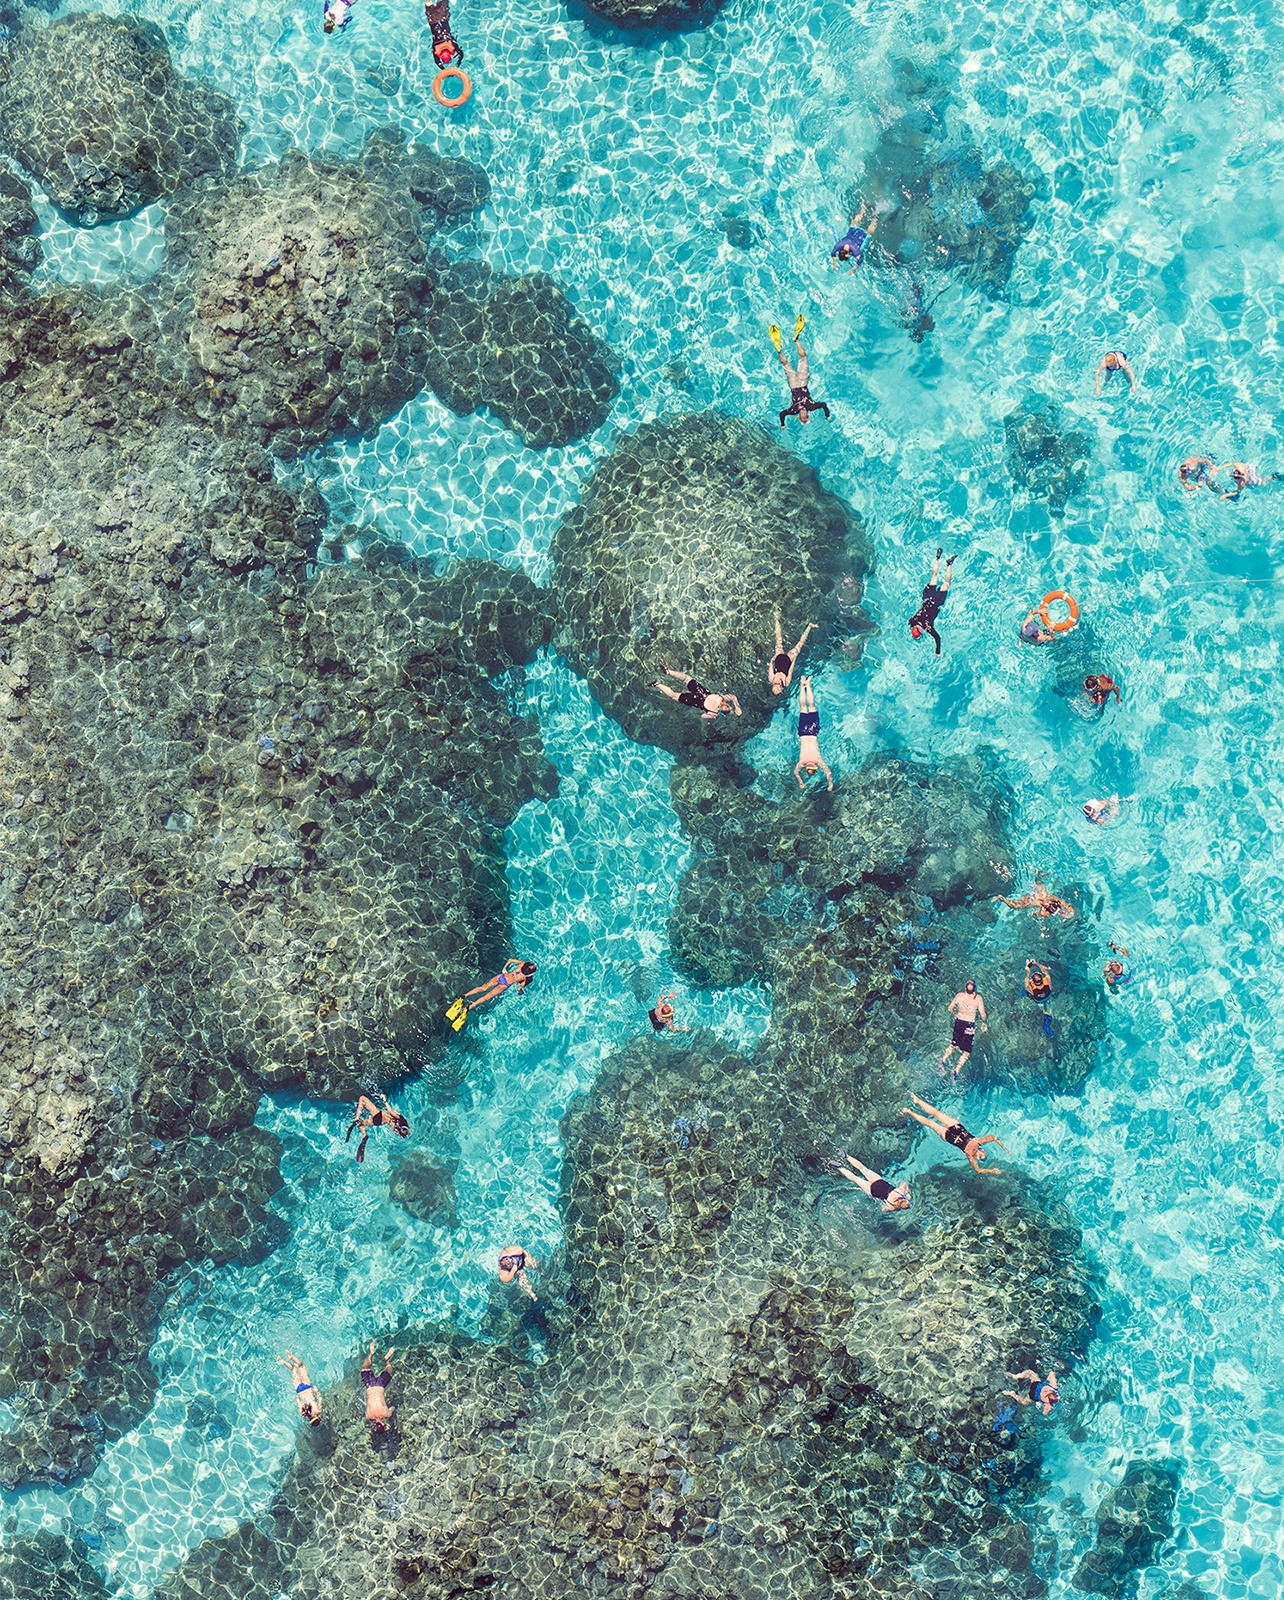 Arial photo of people swimming around a reef in Bora Bora